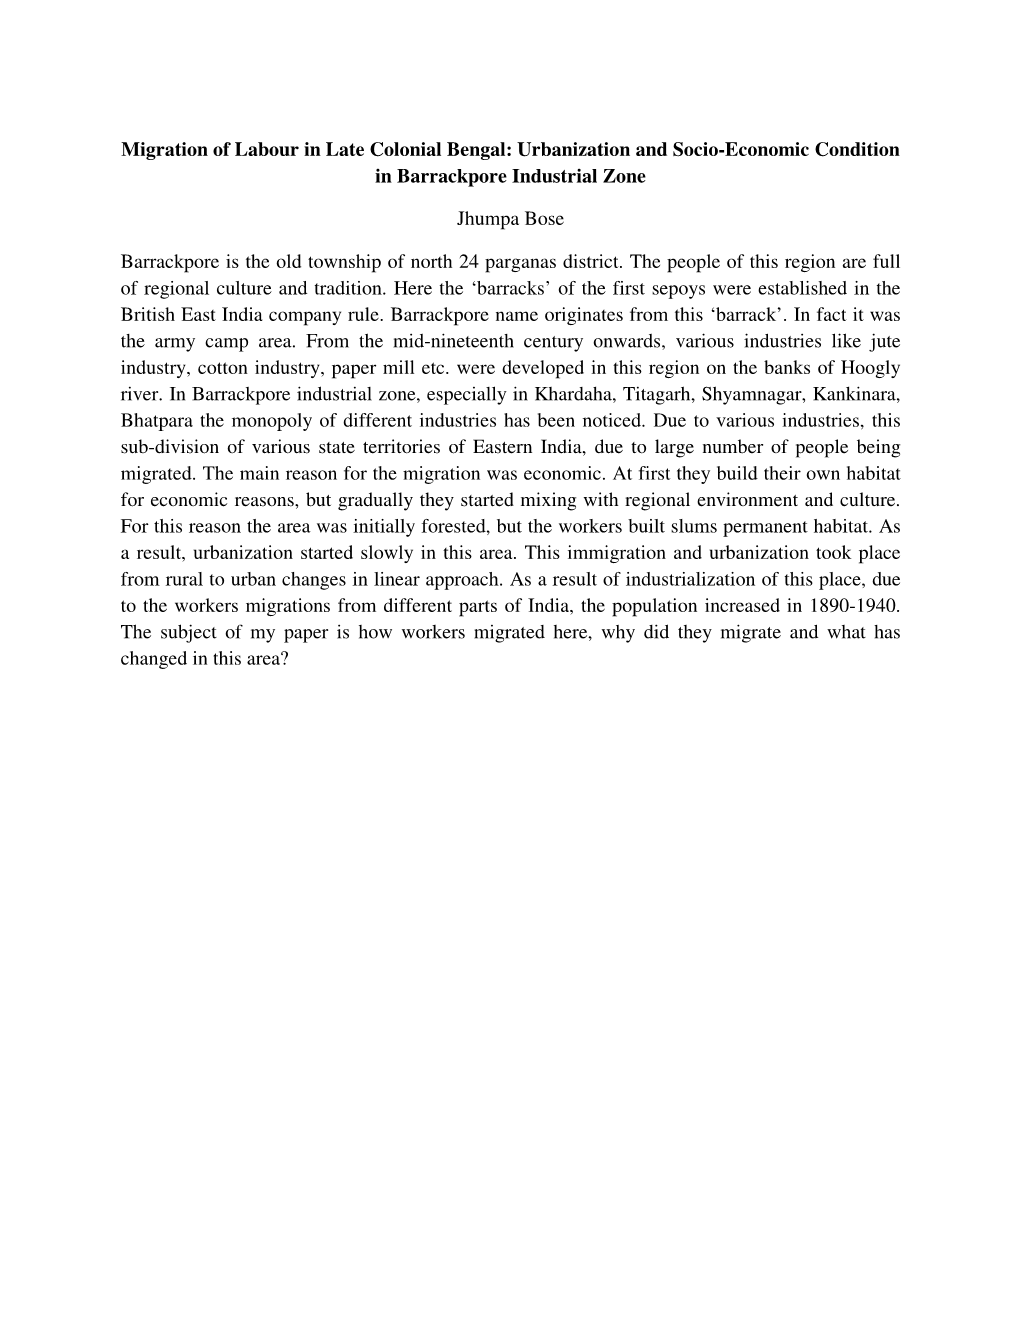 Migration of Labour in Late Colonial Bengal: Urbanization and Socio-Economic Condition in Barrackpore Industrial Zone